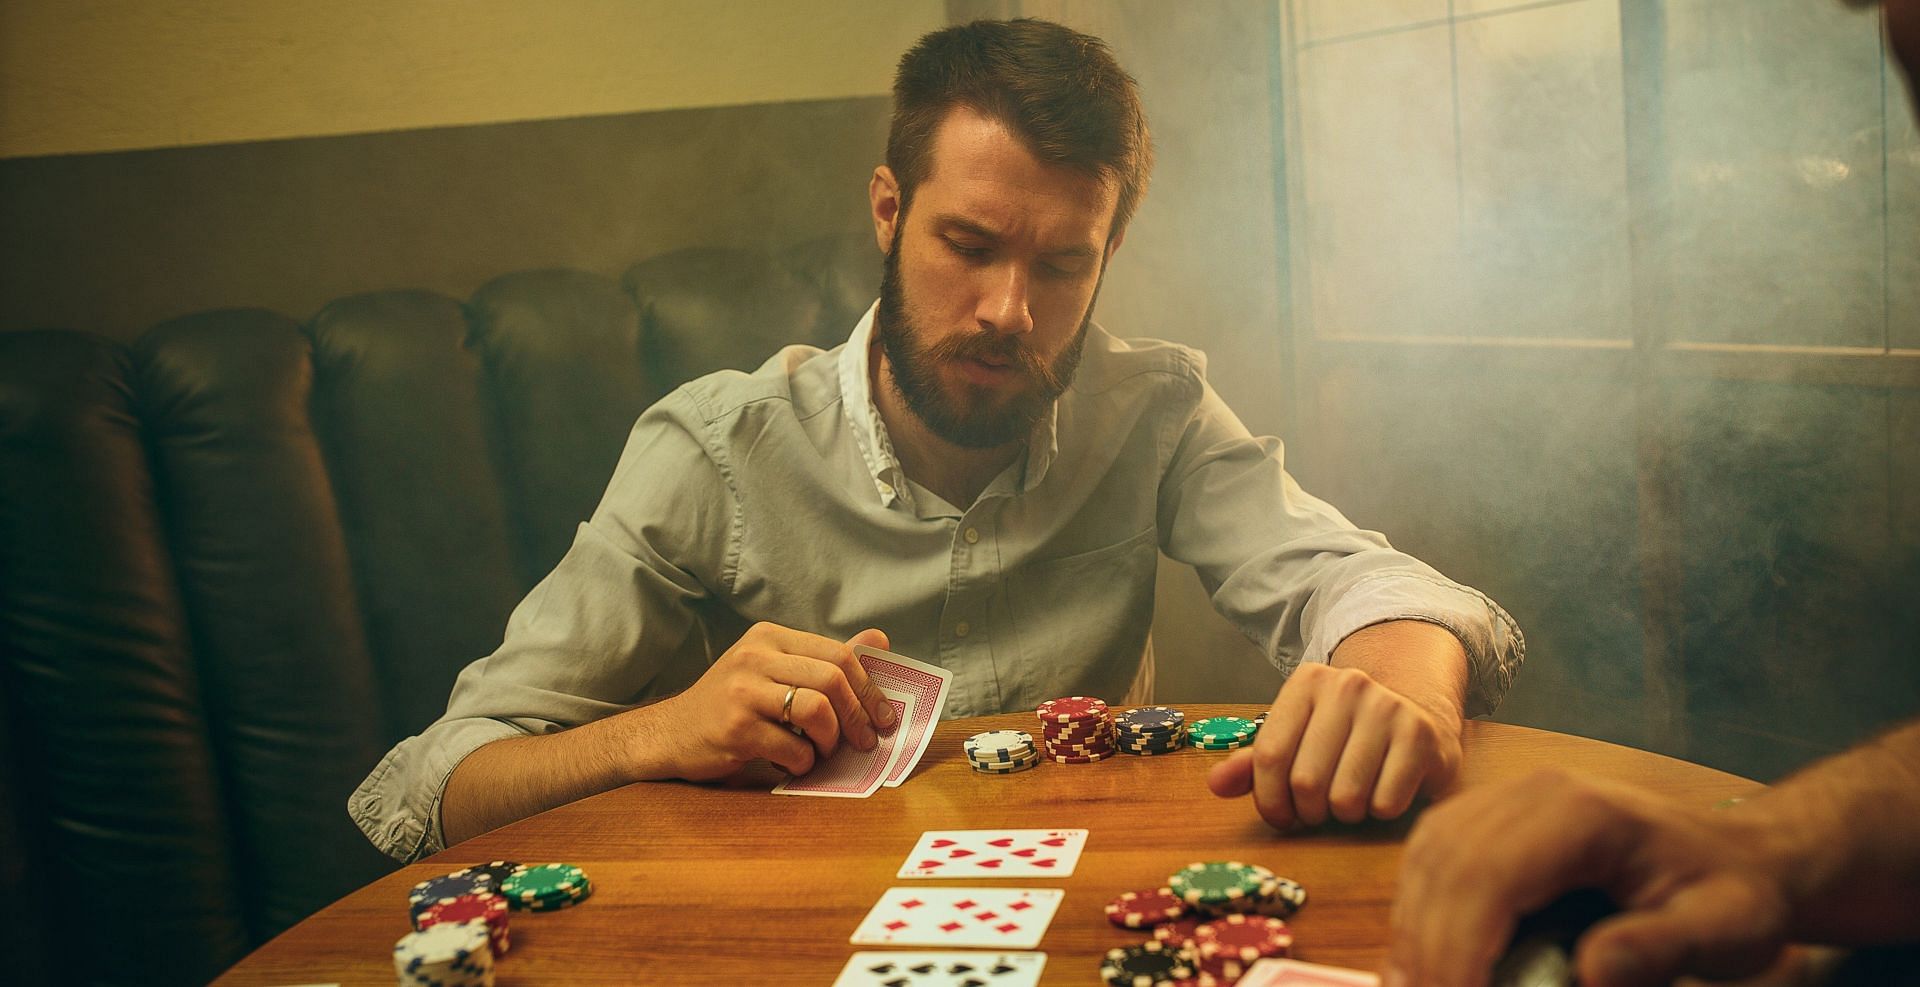 Gambling disorder is a serious mental health concern now recognized by the DSM as a behavioral addiction. (Image via Freepik/ Master 1305)